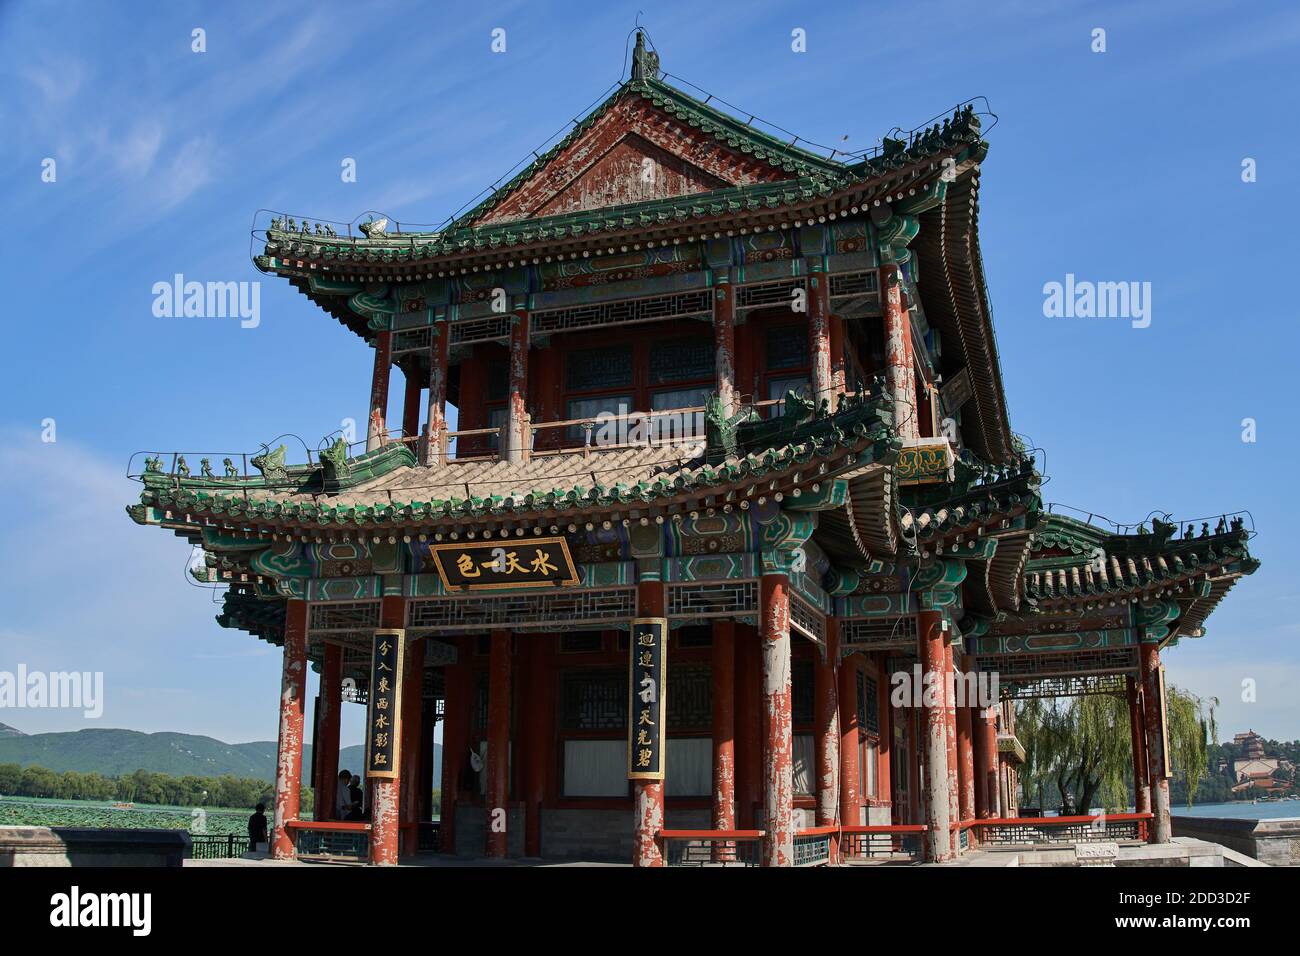 The Summer Palace in Beijing building Stock Photo